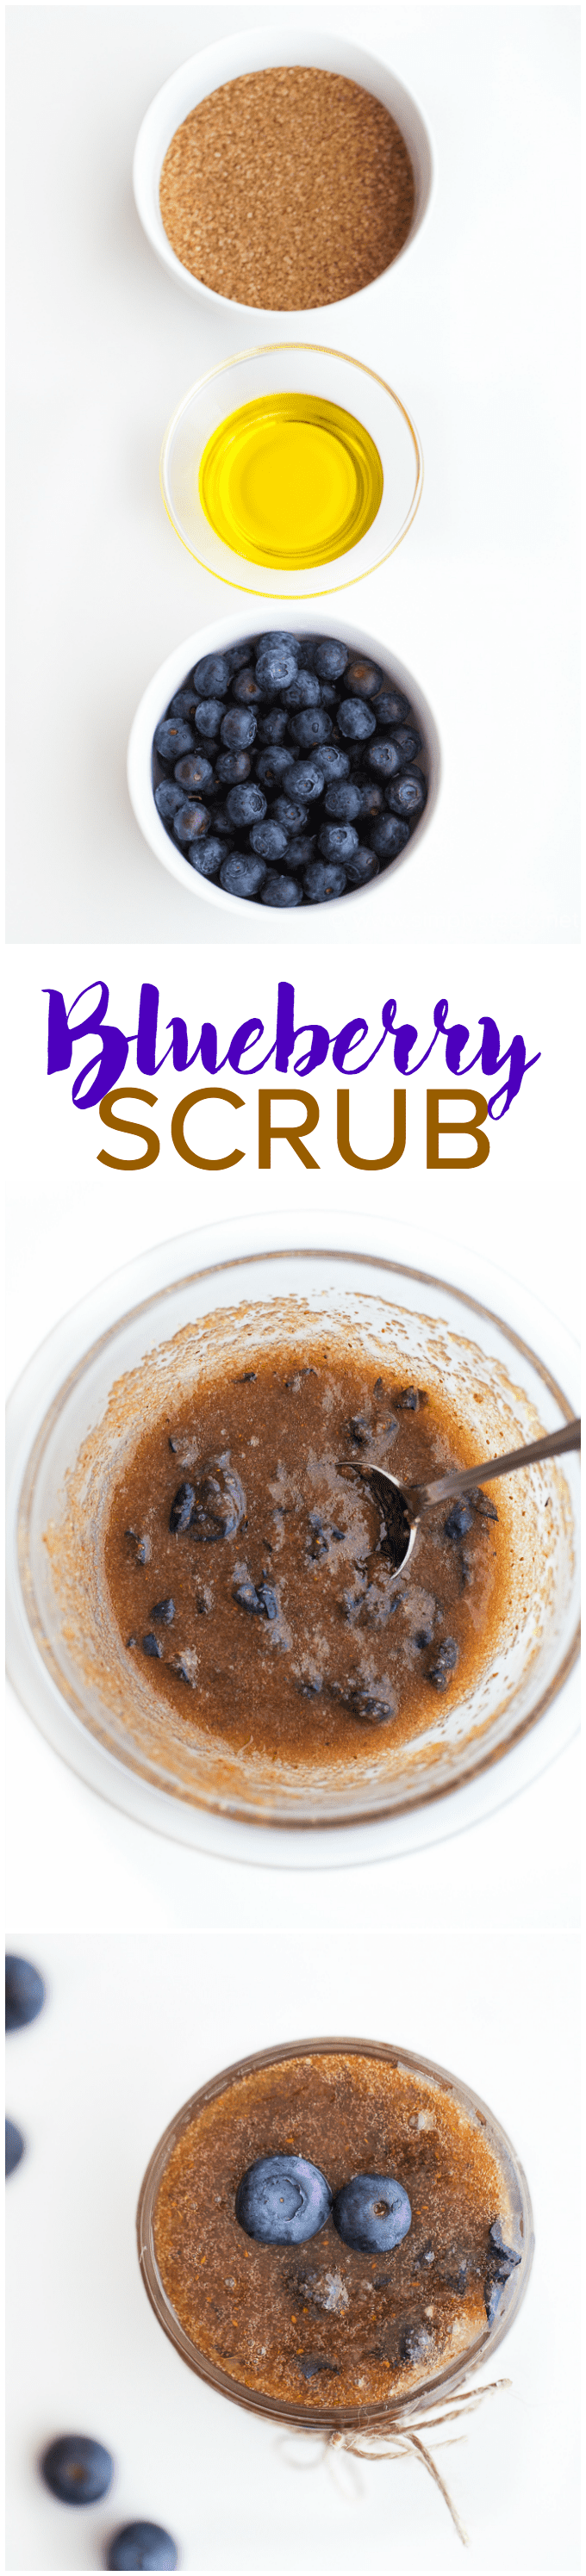 Blueberry Exfoliating Sugar Scrub - Super simple DIY sugar scrub you can make with easy to find ingredients! Skin feels so soft and smooth after just one use.